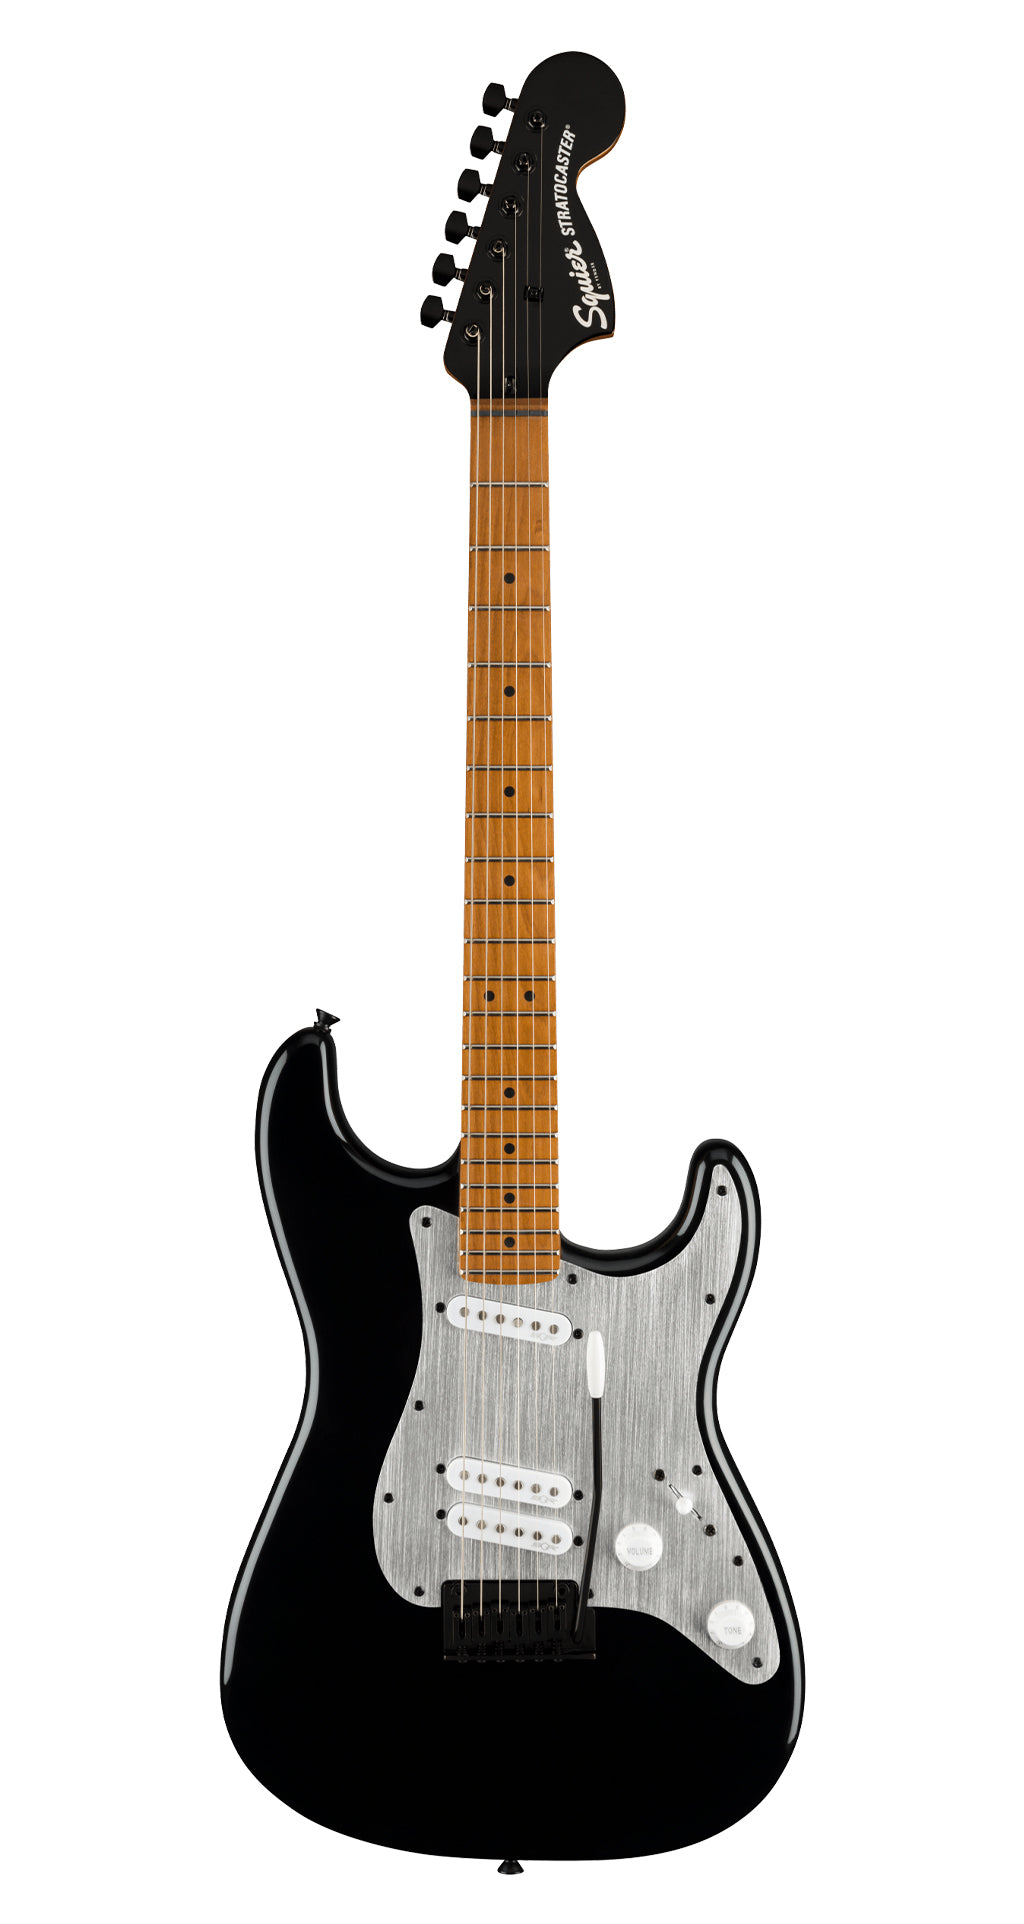 Fender Squier Contemporary Stratocaster Special, Roasted Maple Fingerboard, Silver Anodized Pickguard, Black